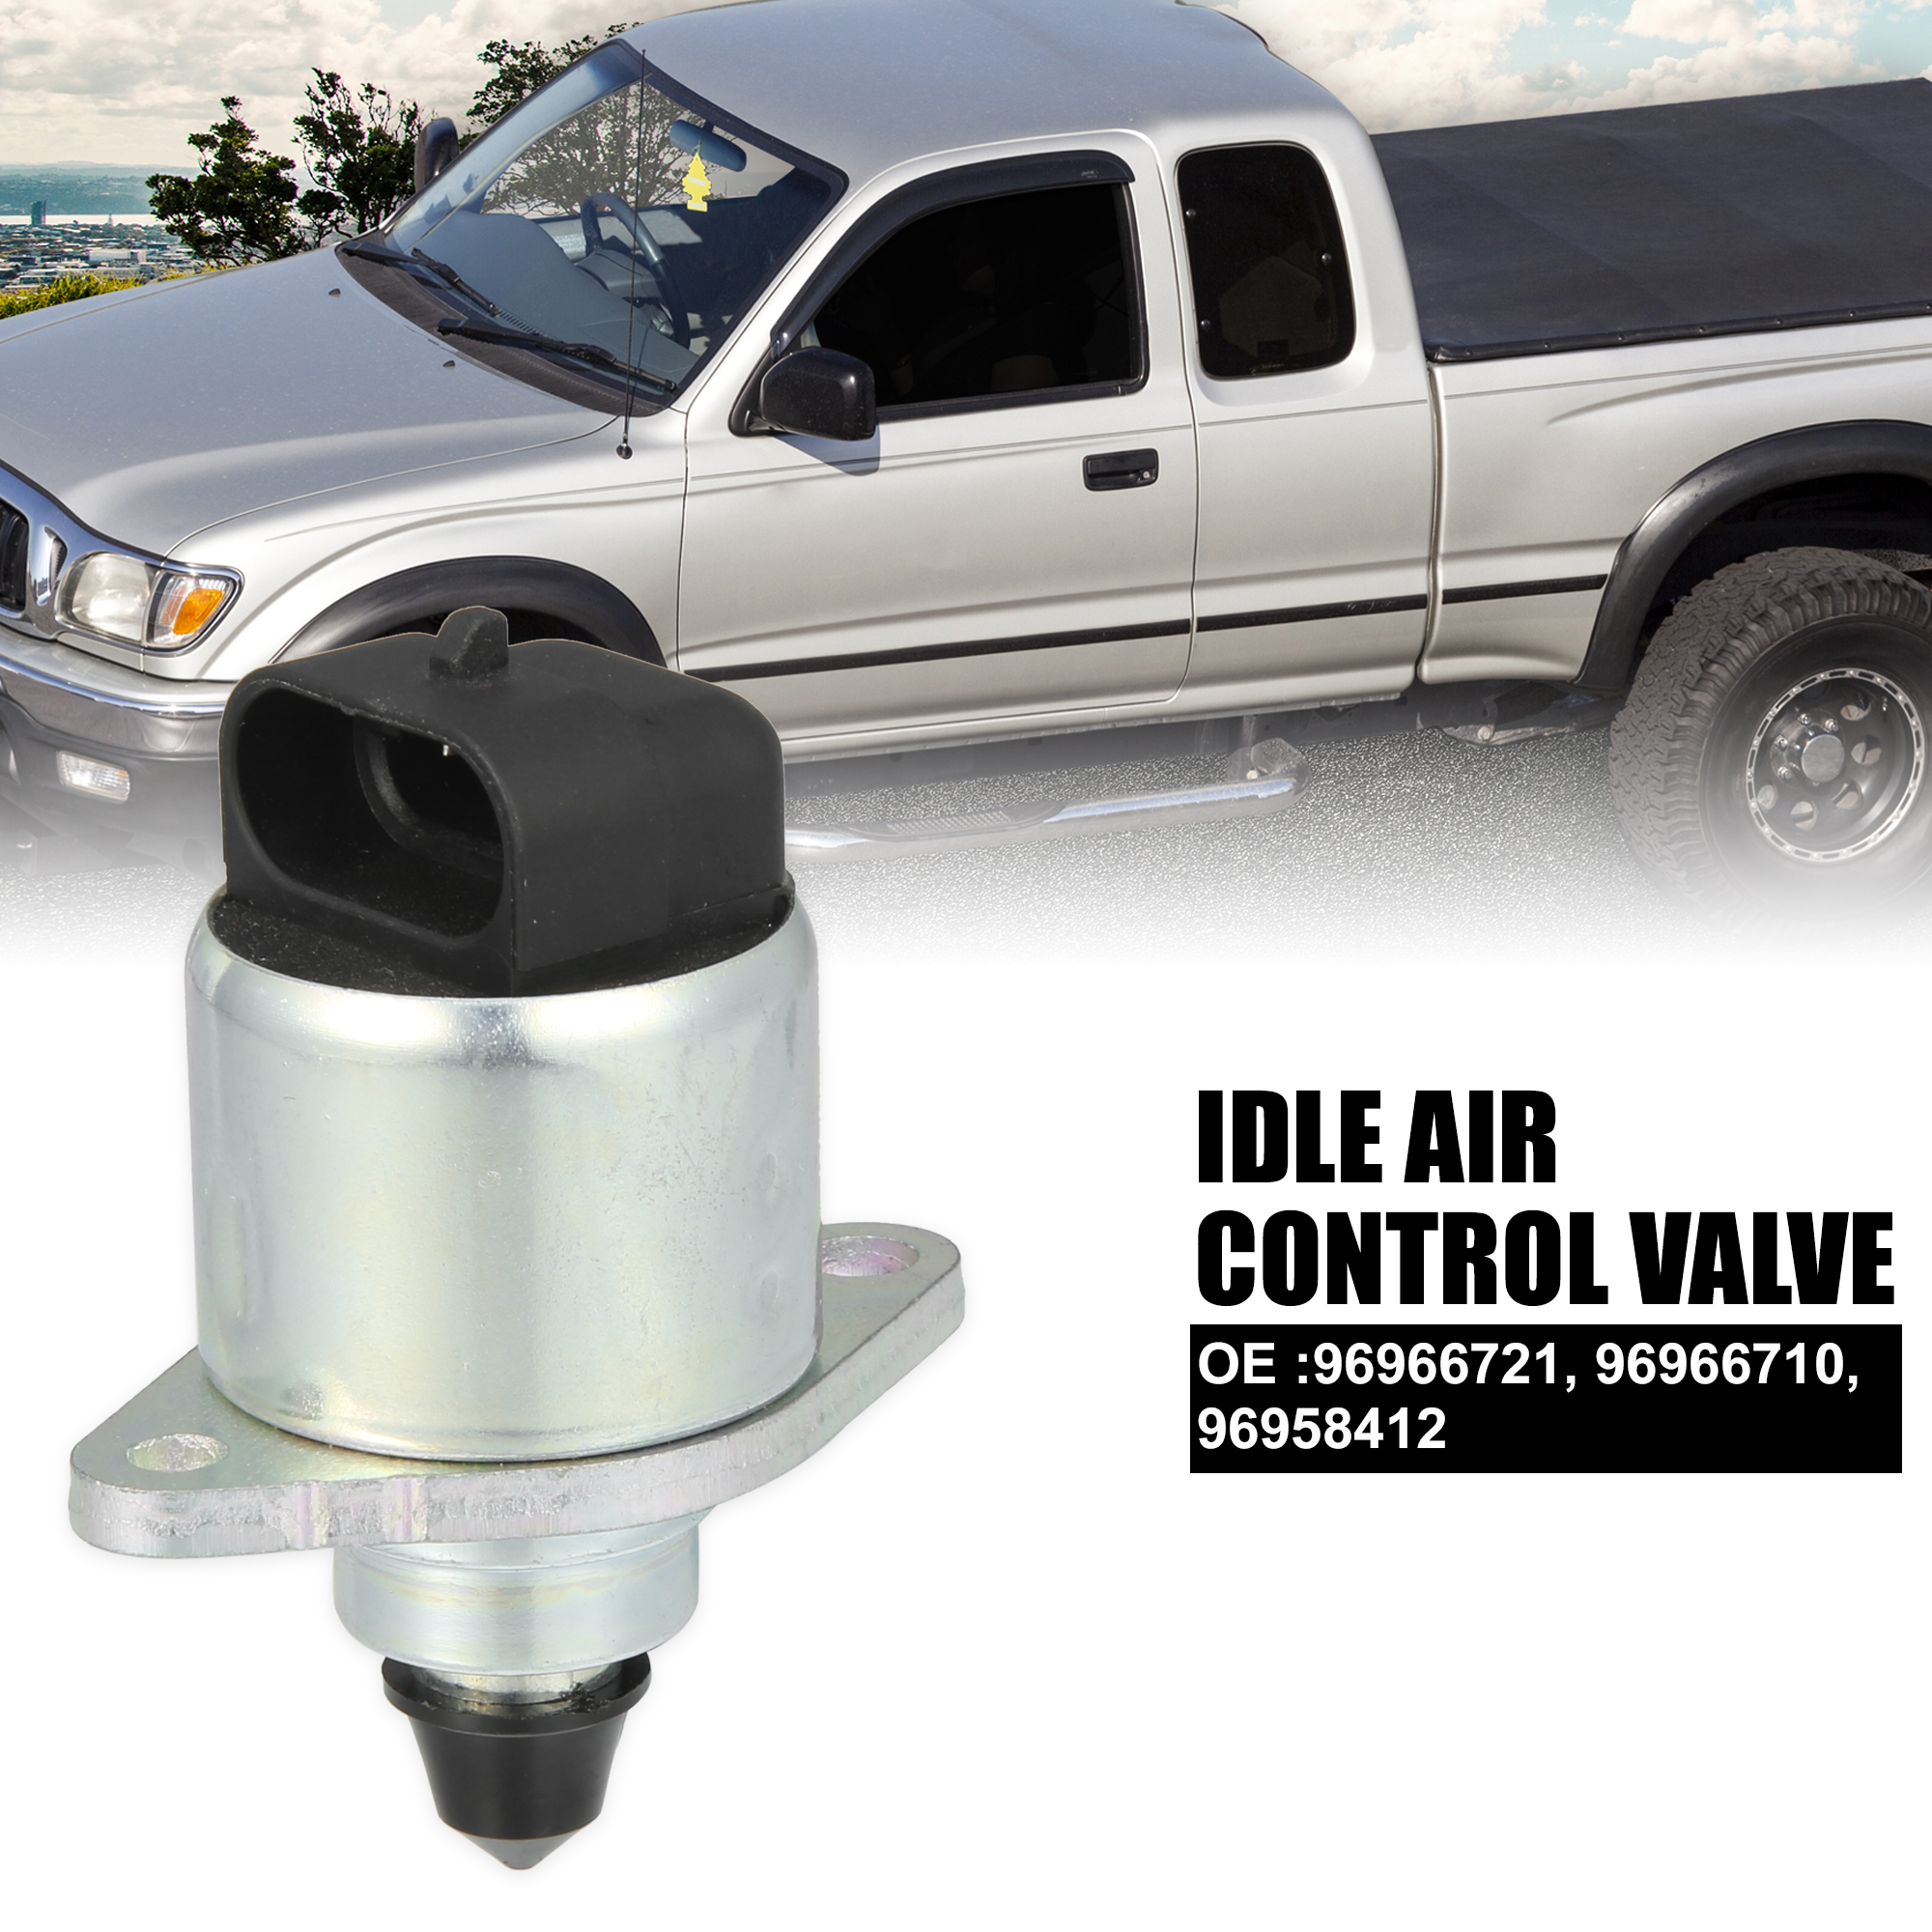 Car Idle Air Control Valve 96966721 96966710 96958412 with Gaskets for Chevy Spark M300 1.0L Silver Tone - image 3 of 6